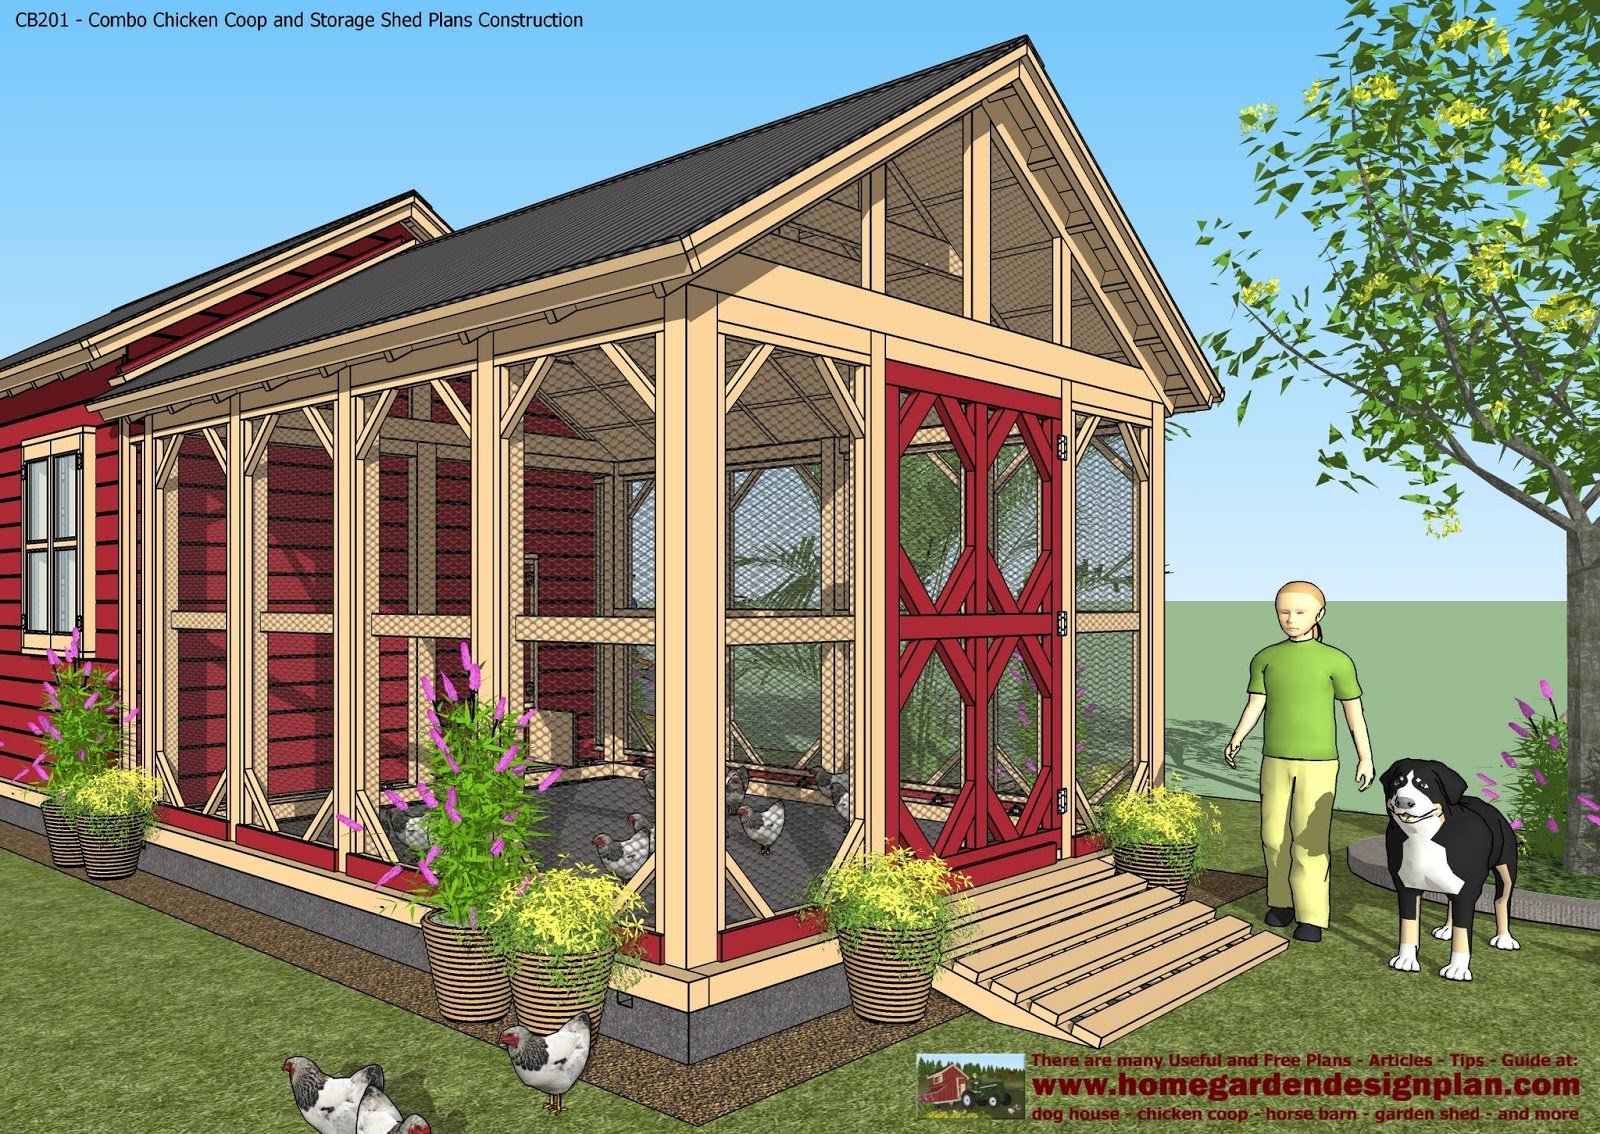 shed plans colonial style: cb201 combo plans chicken coop